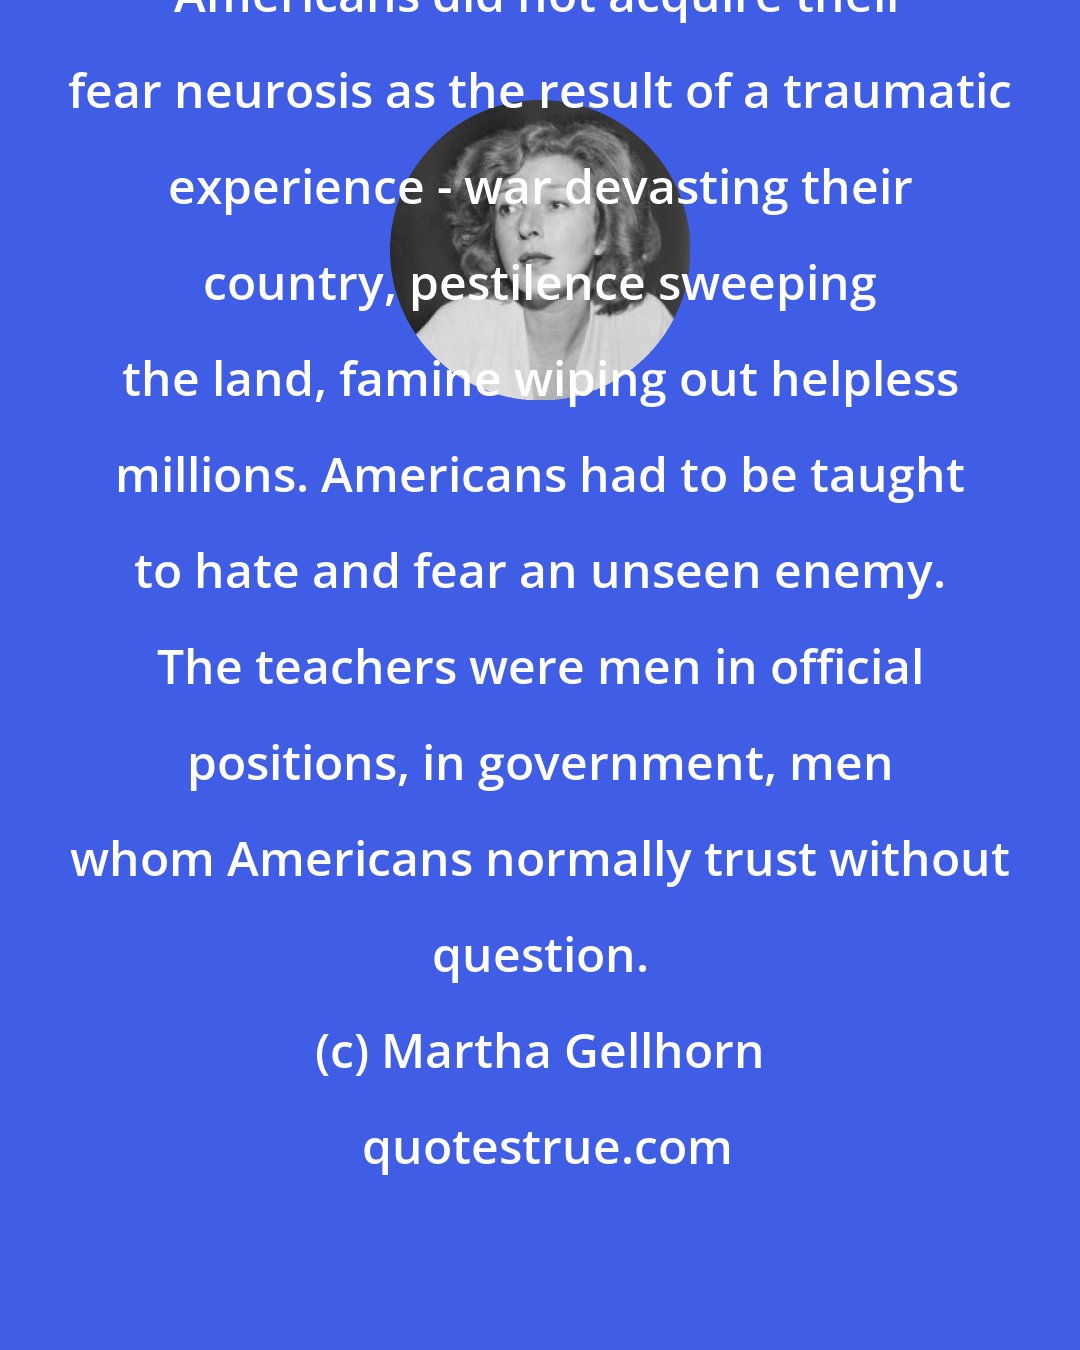 Martha Gellhorn: Americans did not acquire their fear neurosis as the result of a traumatic experience - war devasting their country, pestilence sweeping the land, famine wiping out helpless millions. Americans had to be taught to hate and fear an unseen enemy. The teachers were men in official positions, in government, men whom Americans normally trust without question.